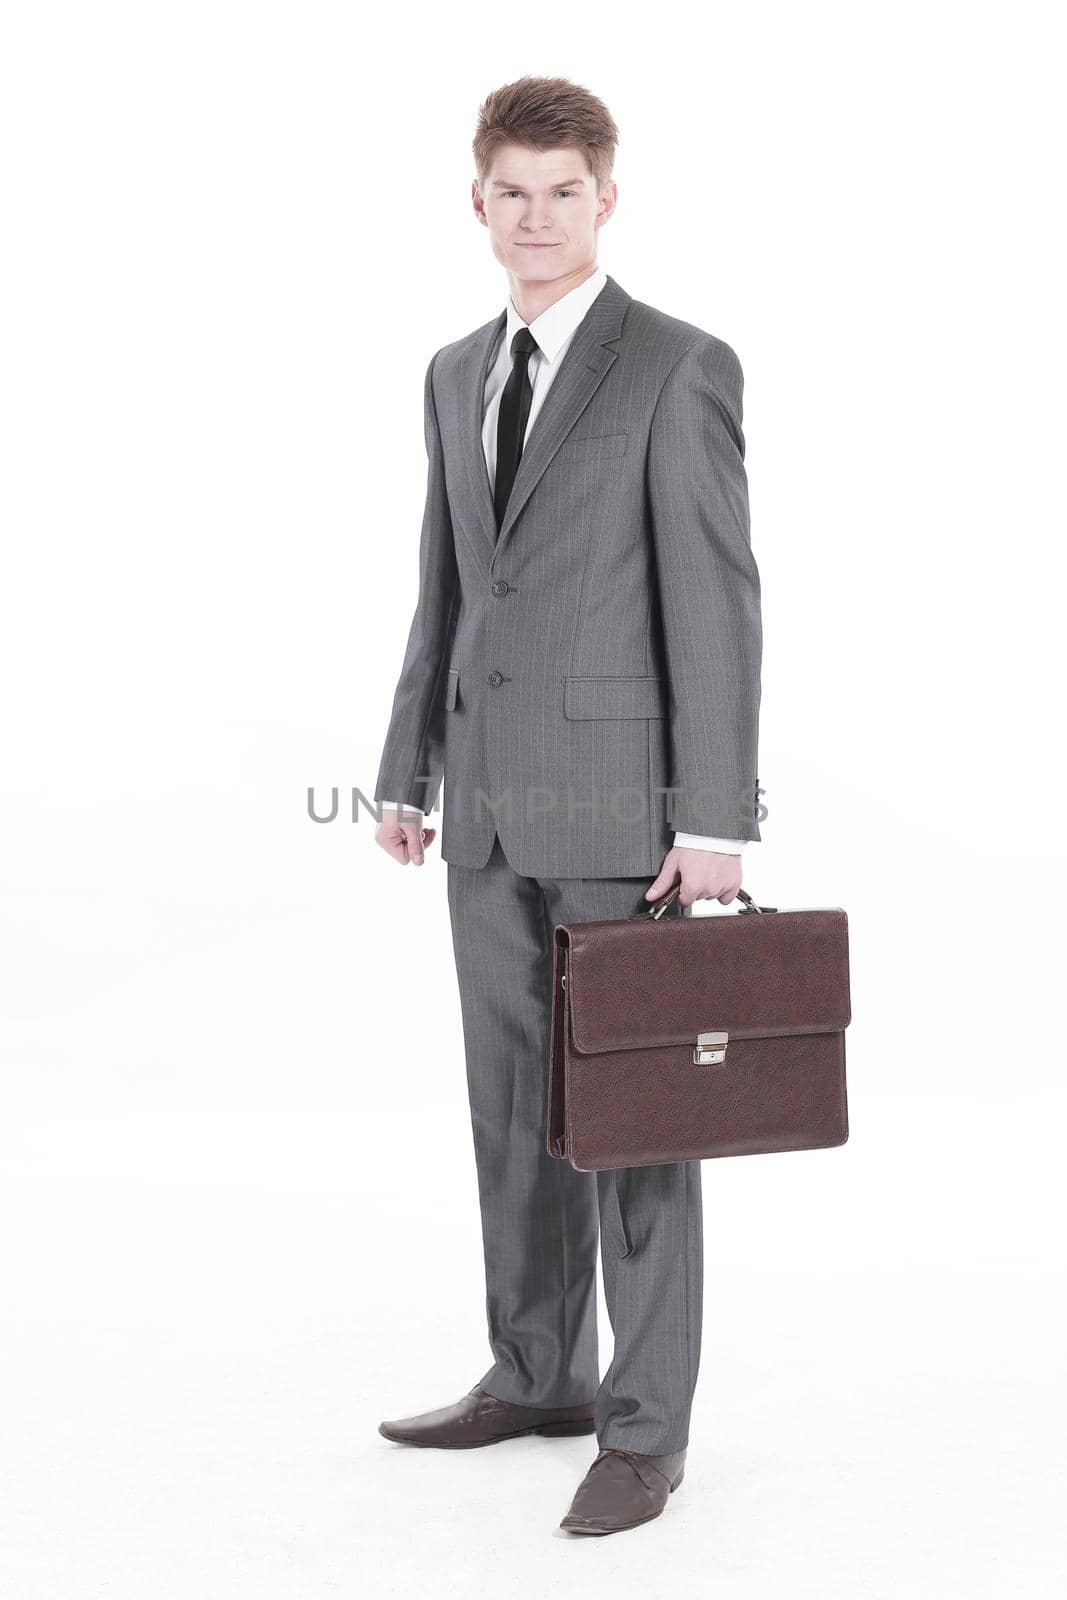 in full growth.young businessman with a leather briefcase. by SmartPhotoLab